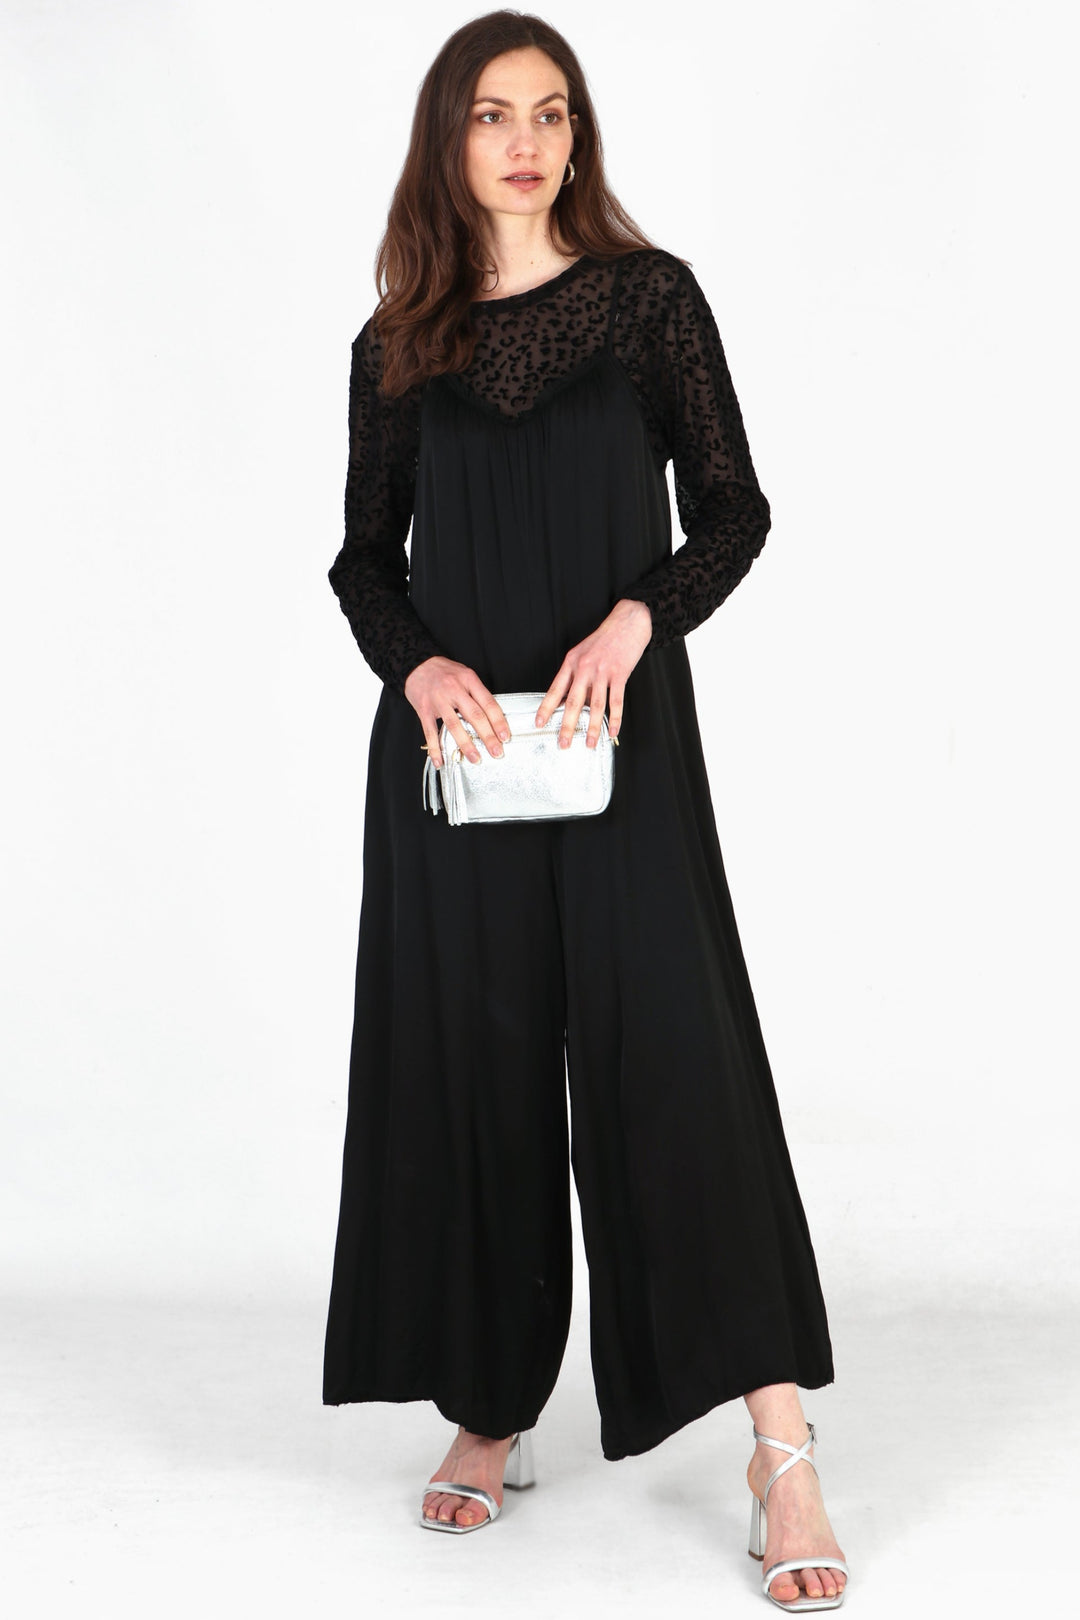 Model wearing black silky strappy wide leg jumpsuit with black sheer leopard print top underneath. Holding silver camer bag and wearing silver heels